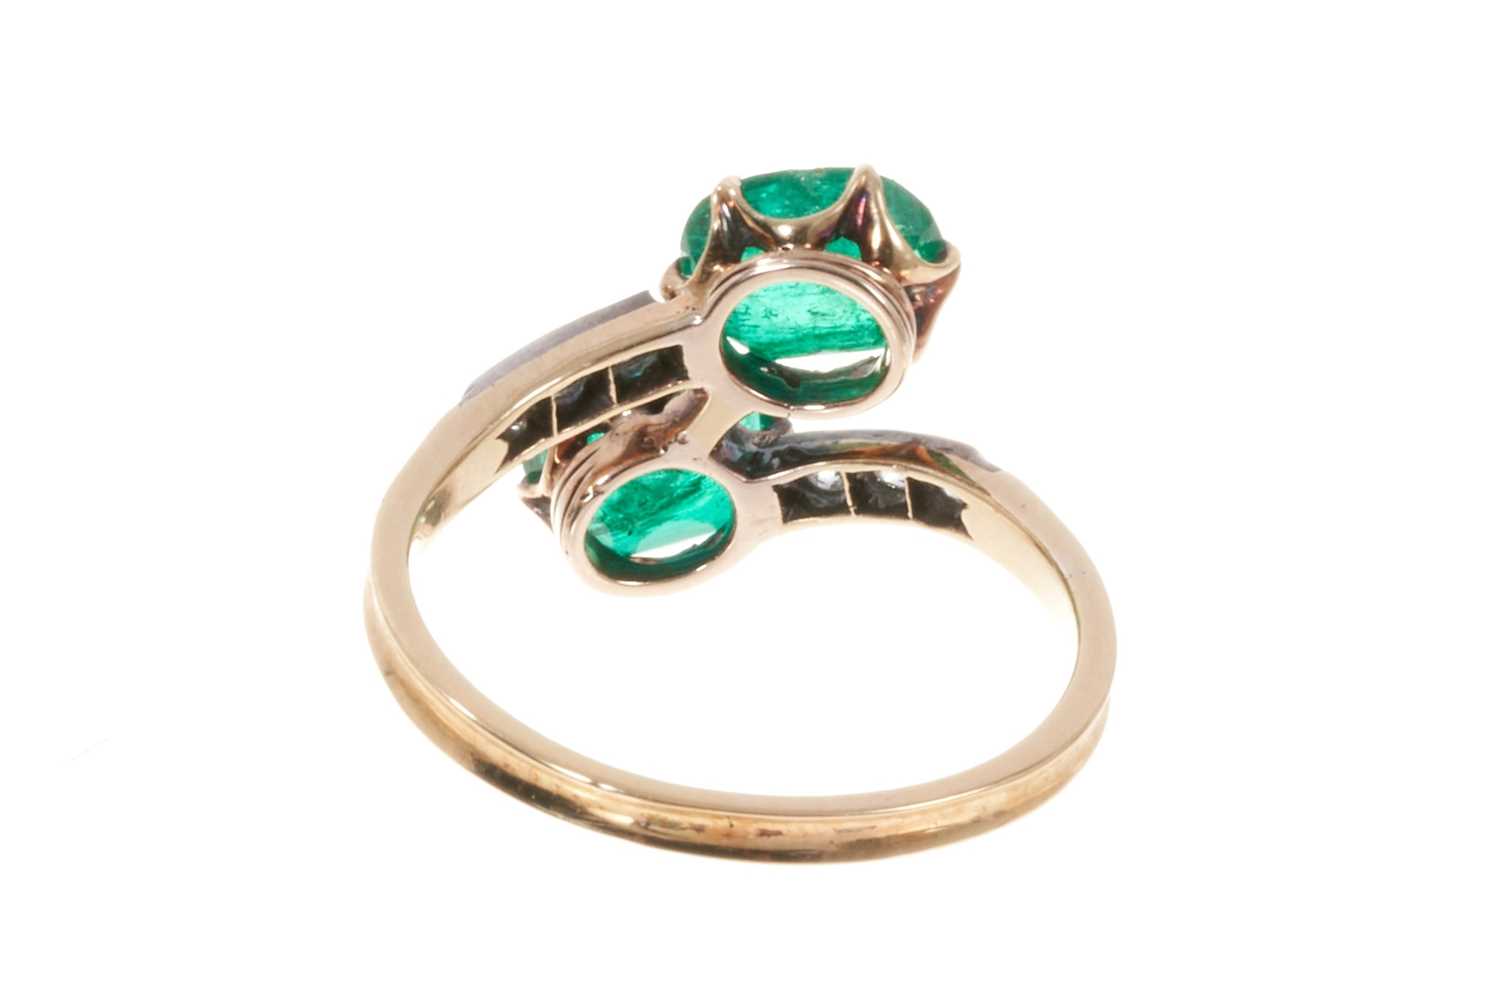 Antique emerald and diamond cross-over ring - Image 3 of 5